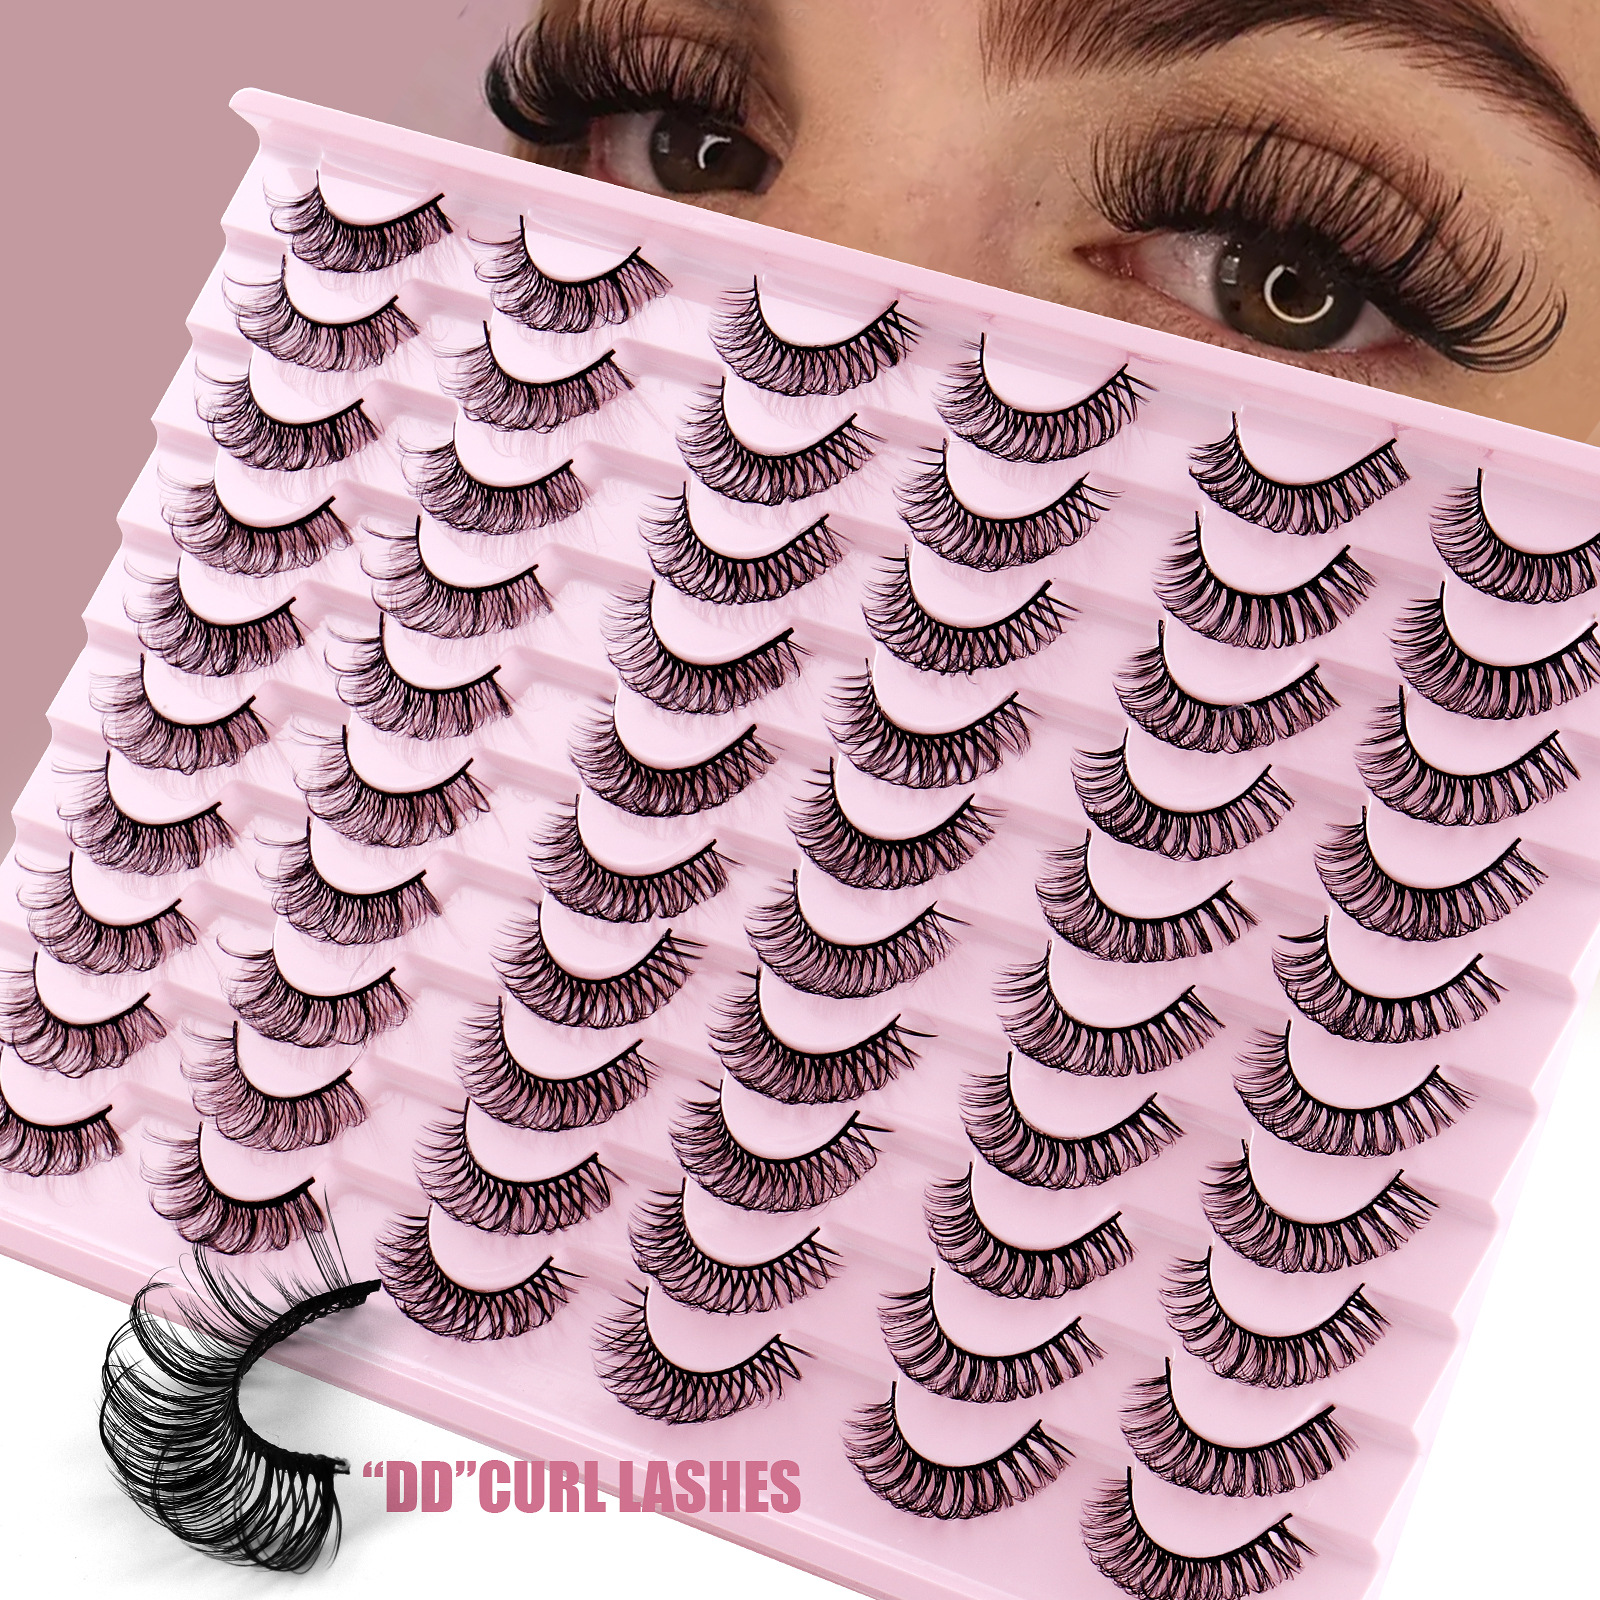 Thick Curly 30 Pairs False Eyelashes Set Naturally Soft & Delicate Reusable Handmade Multilayer 3D Mink Fake Lashes Extensions Strip Lash